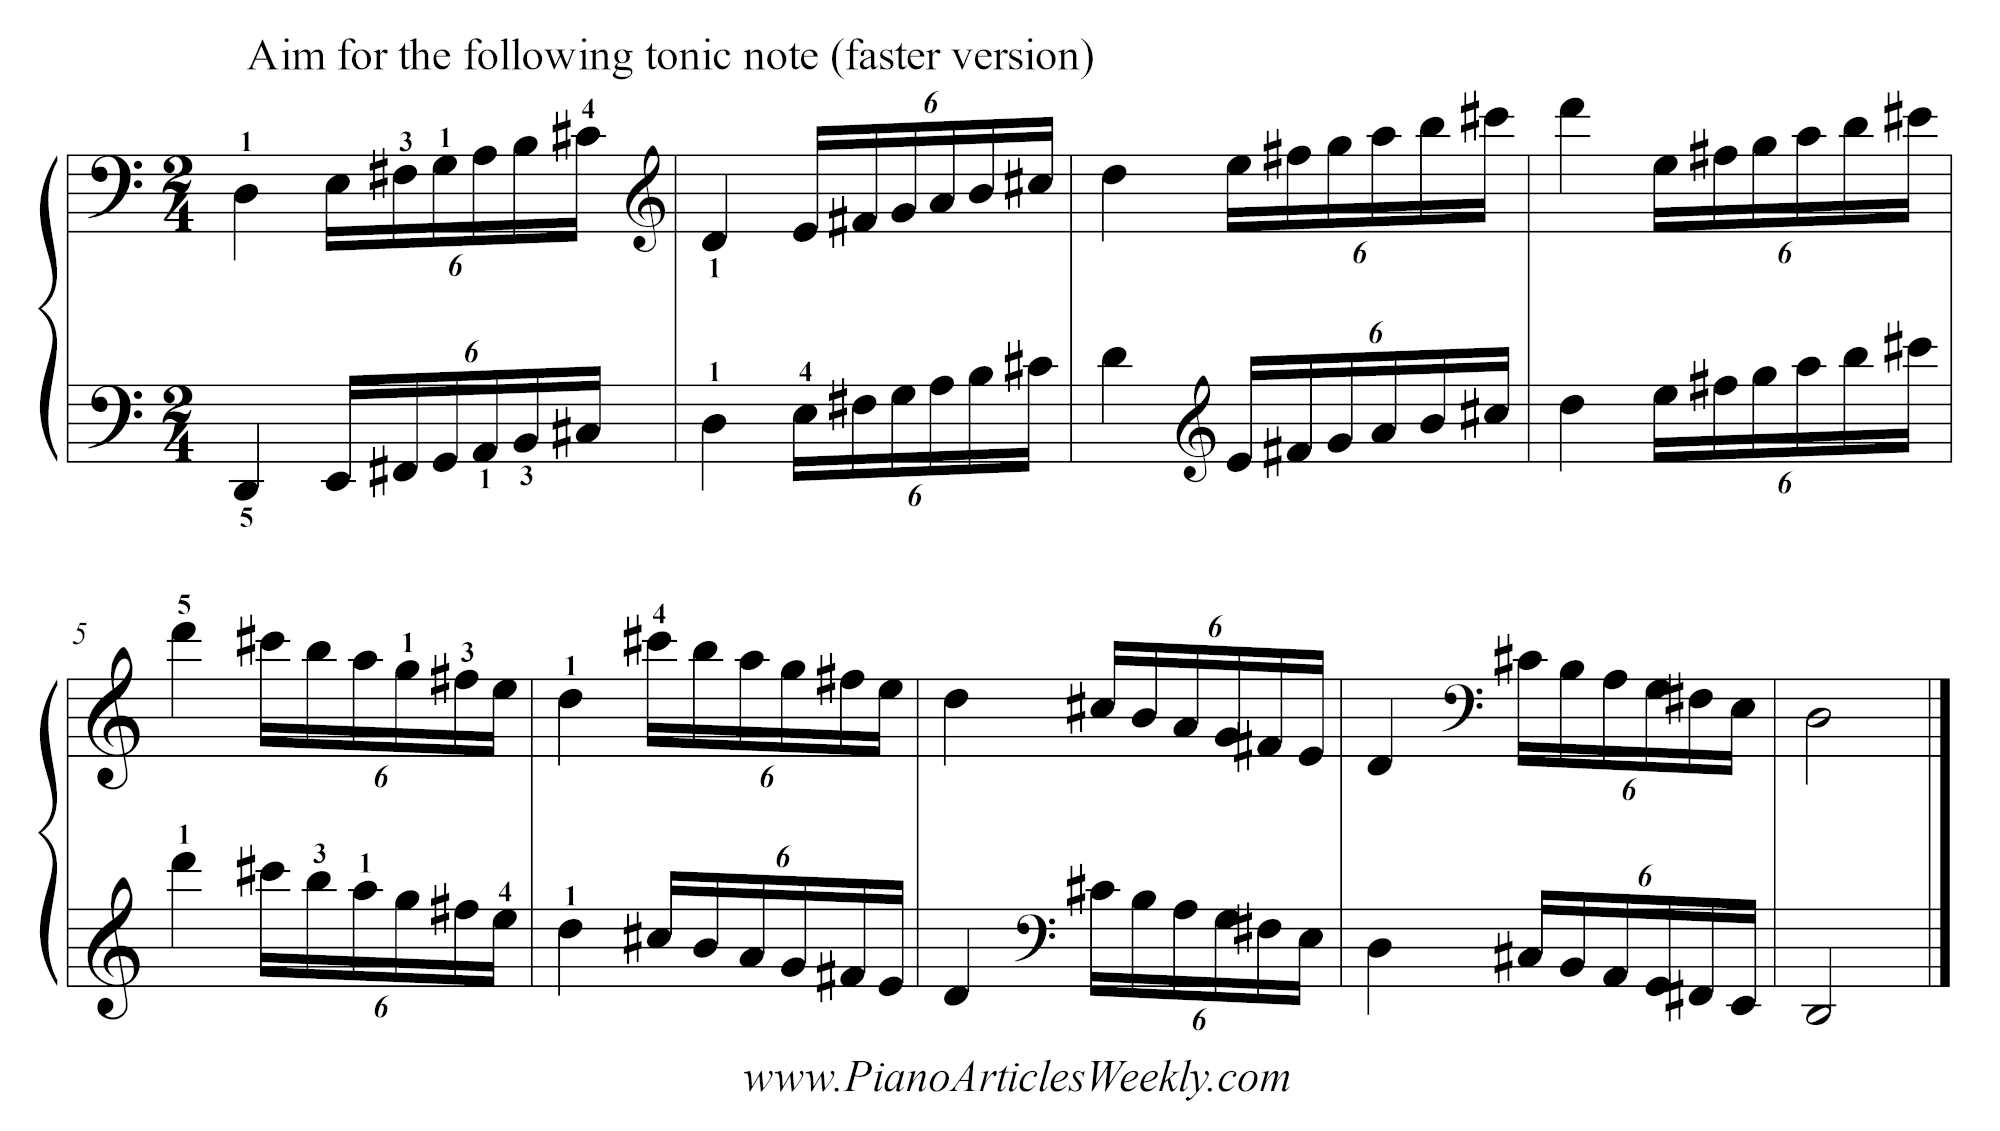 D major piano scale - advanced exercise stopping at every tonic note faster version